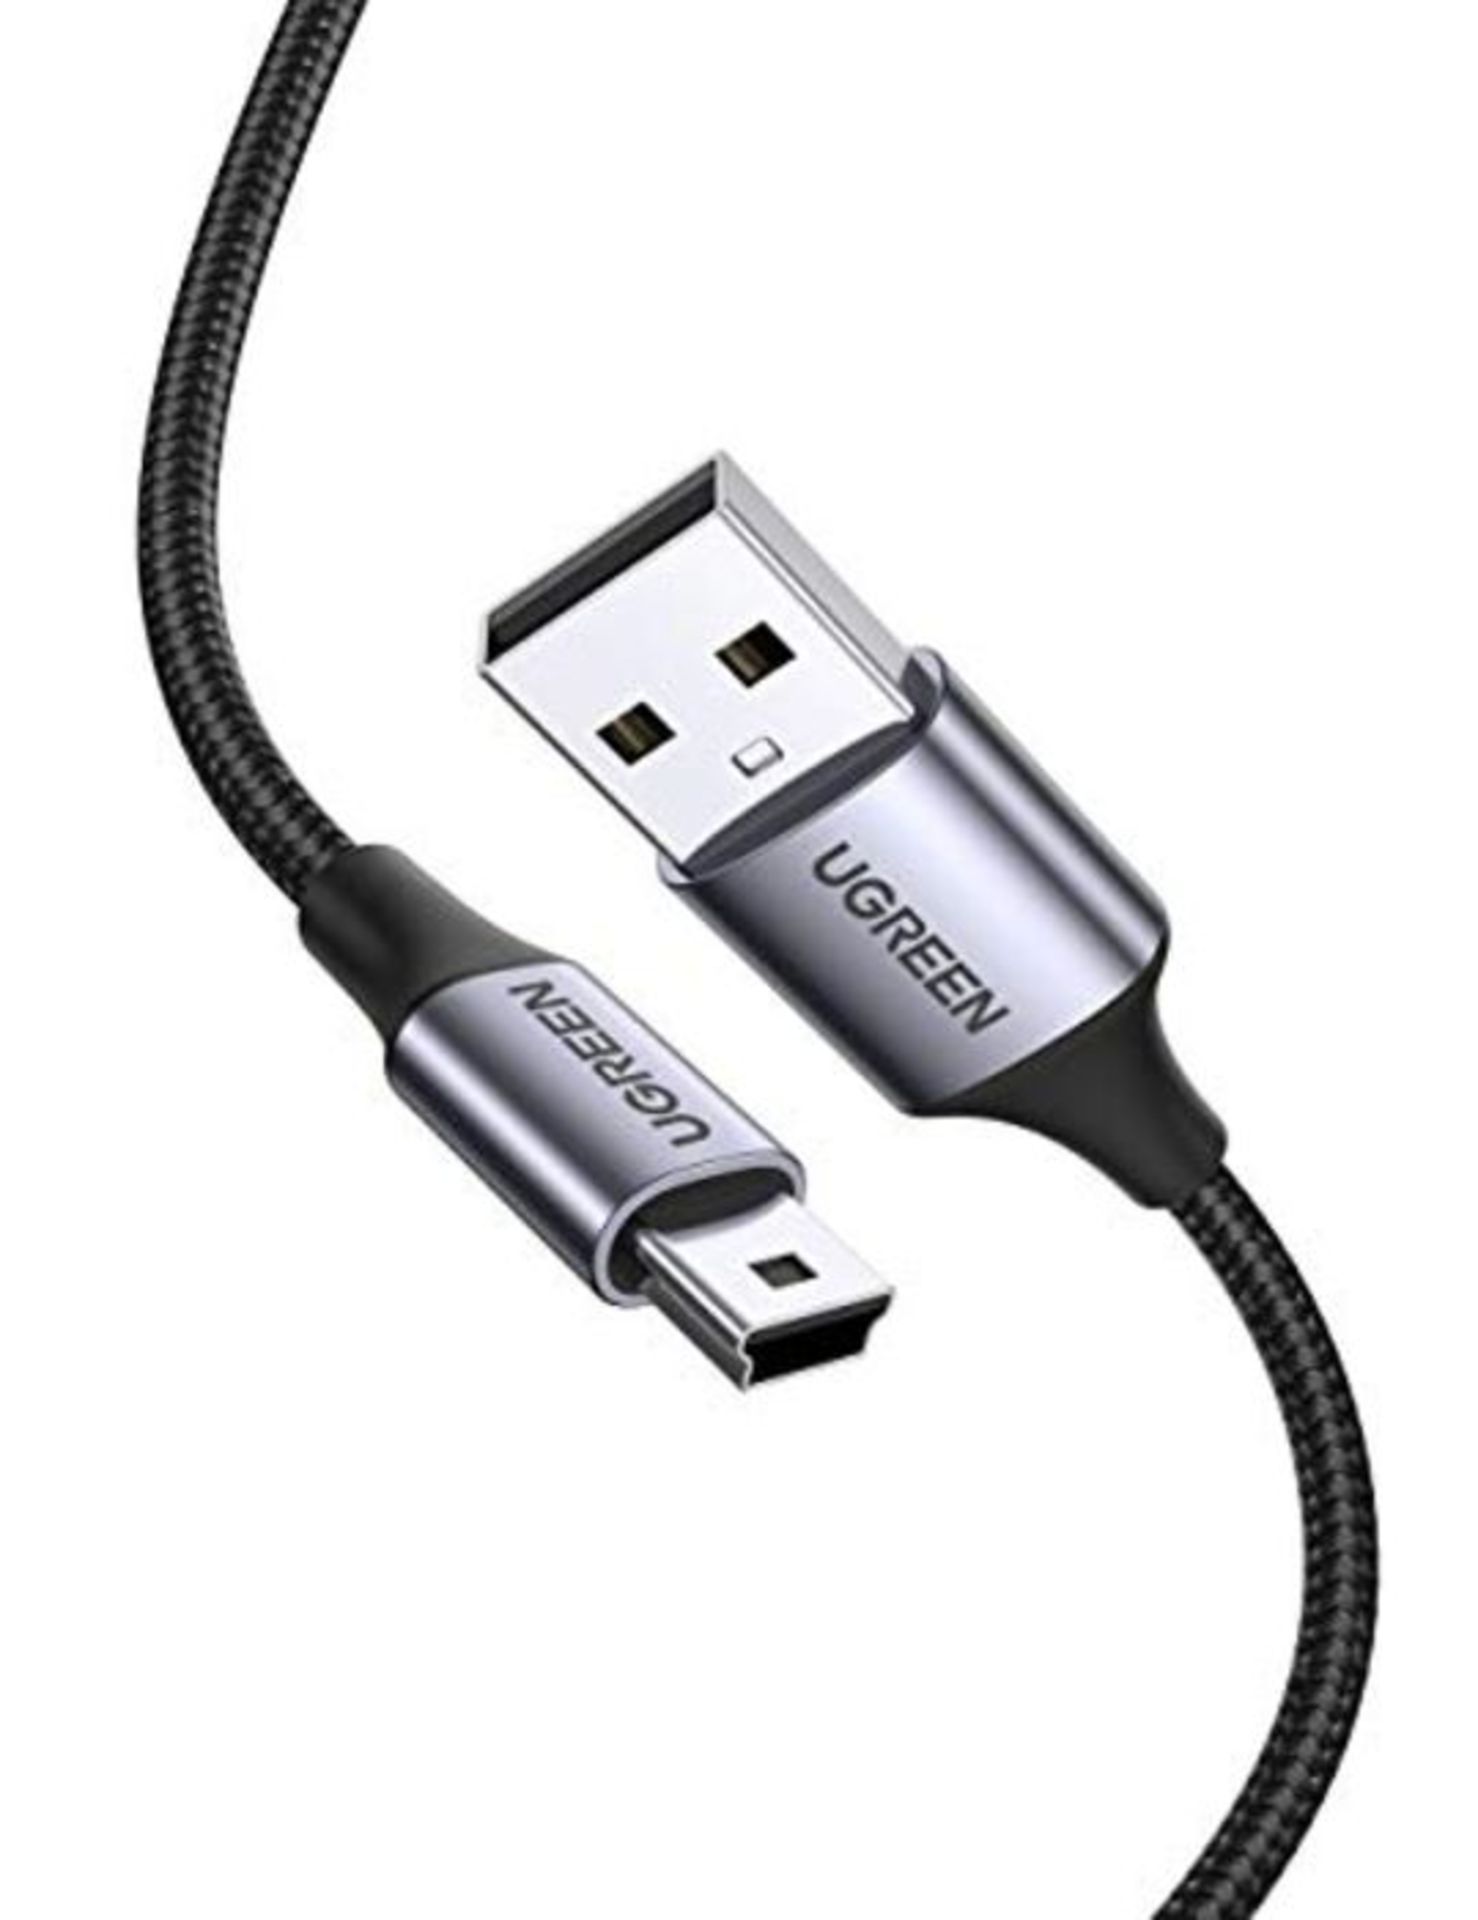 UGREEN Mini USB Cable Braided USB 2.0 to Mini B Cable Data Transfer & Charge Compatibl